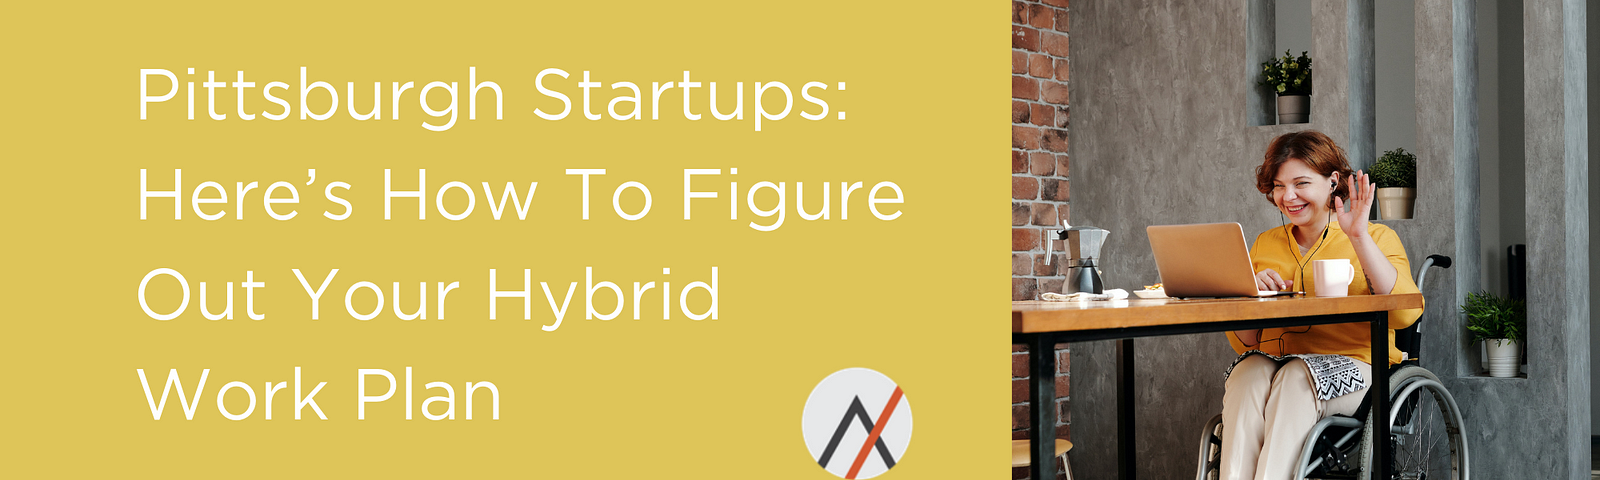 Pittsburgh Startups: Here’s how to figure out your hybrid work plan.